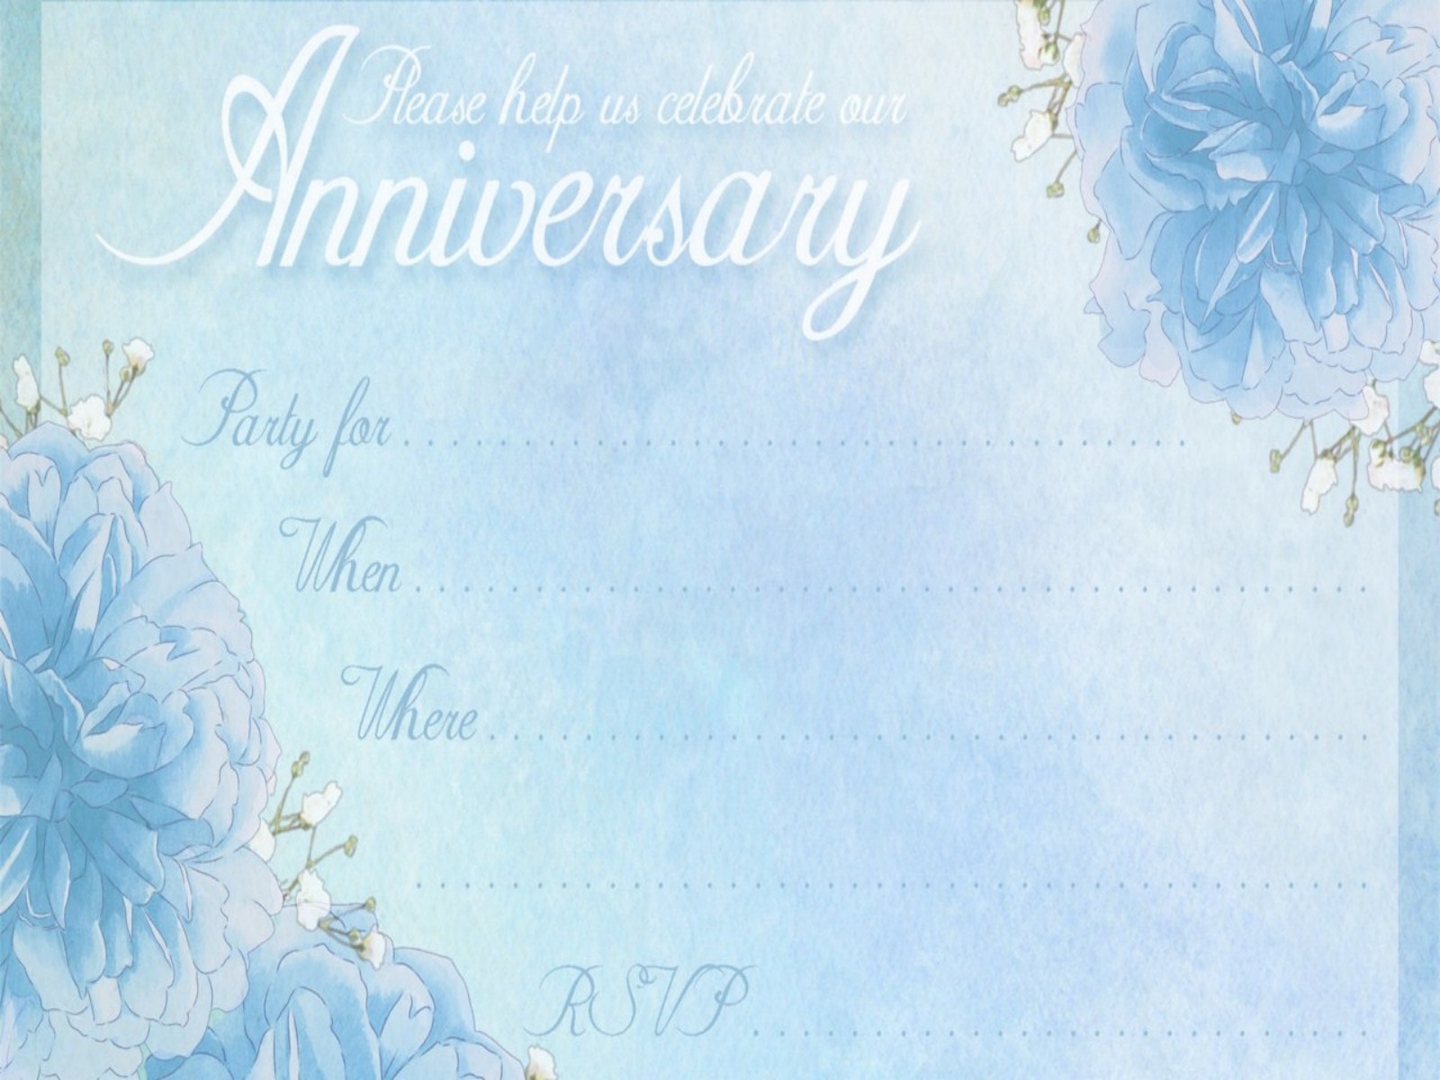 Happy Wedding Anniversary Wishes Card Wallpaper For And Desktop